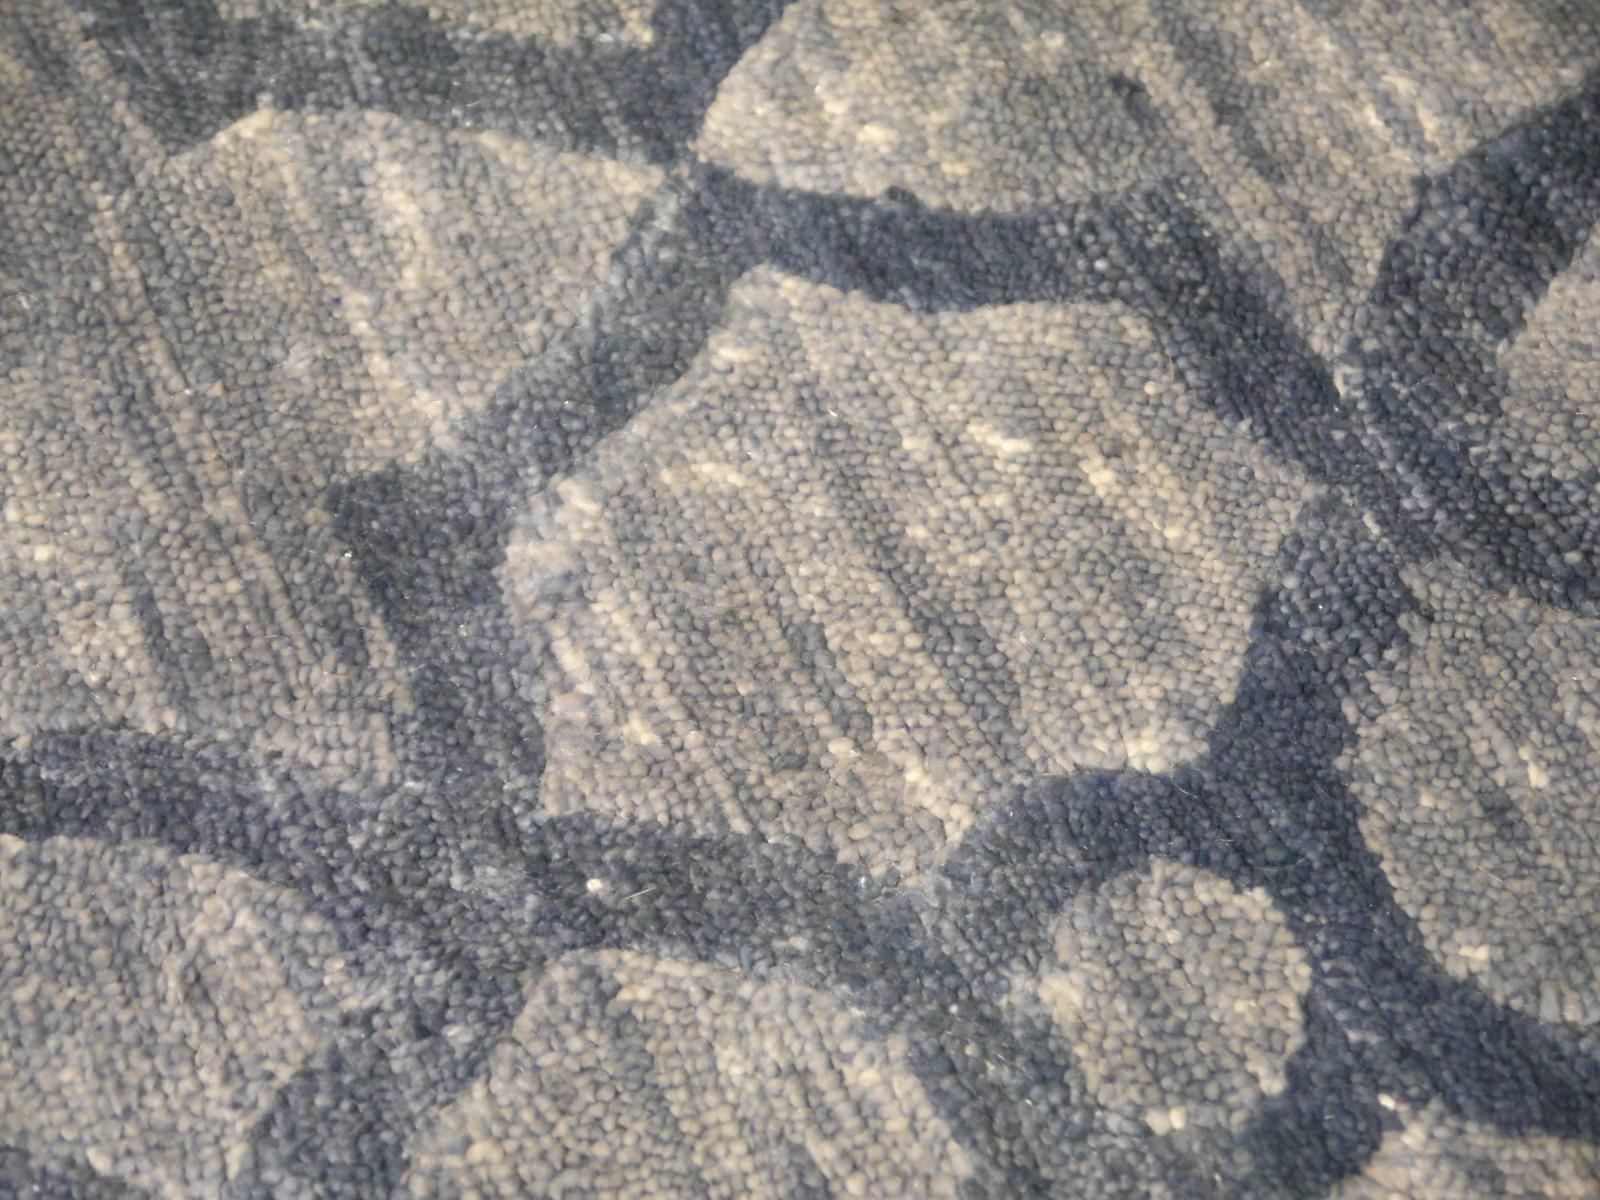 Designer rug circa 9 x 6 ft hand-knotted blue
Exclusive finterior design rug, hand-knotted in two colors from the finest bamboo silk.
Discreet elegance through noble material.
Manufacturing method: hand-knotted
Material: 100% bamboo silk made using